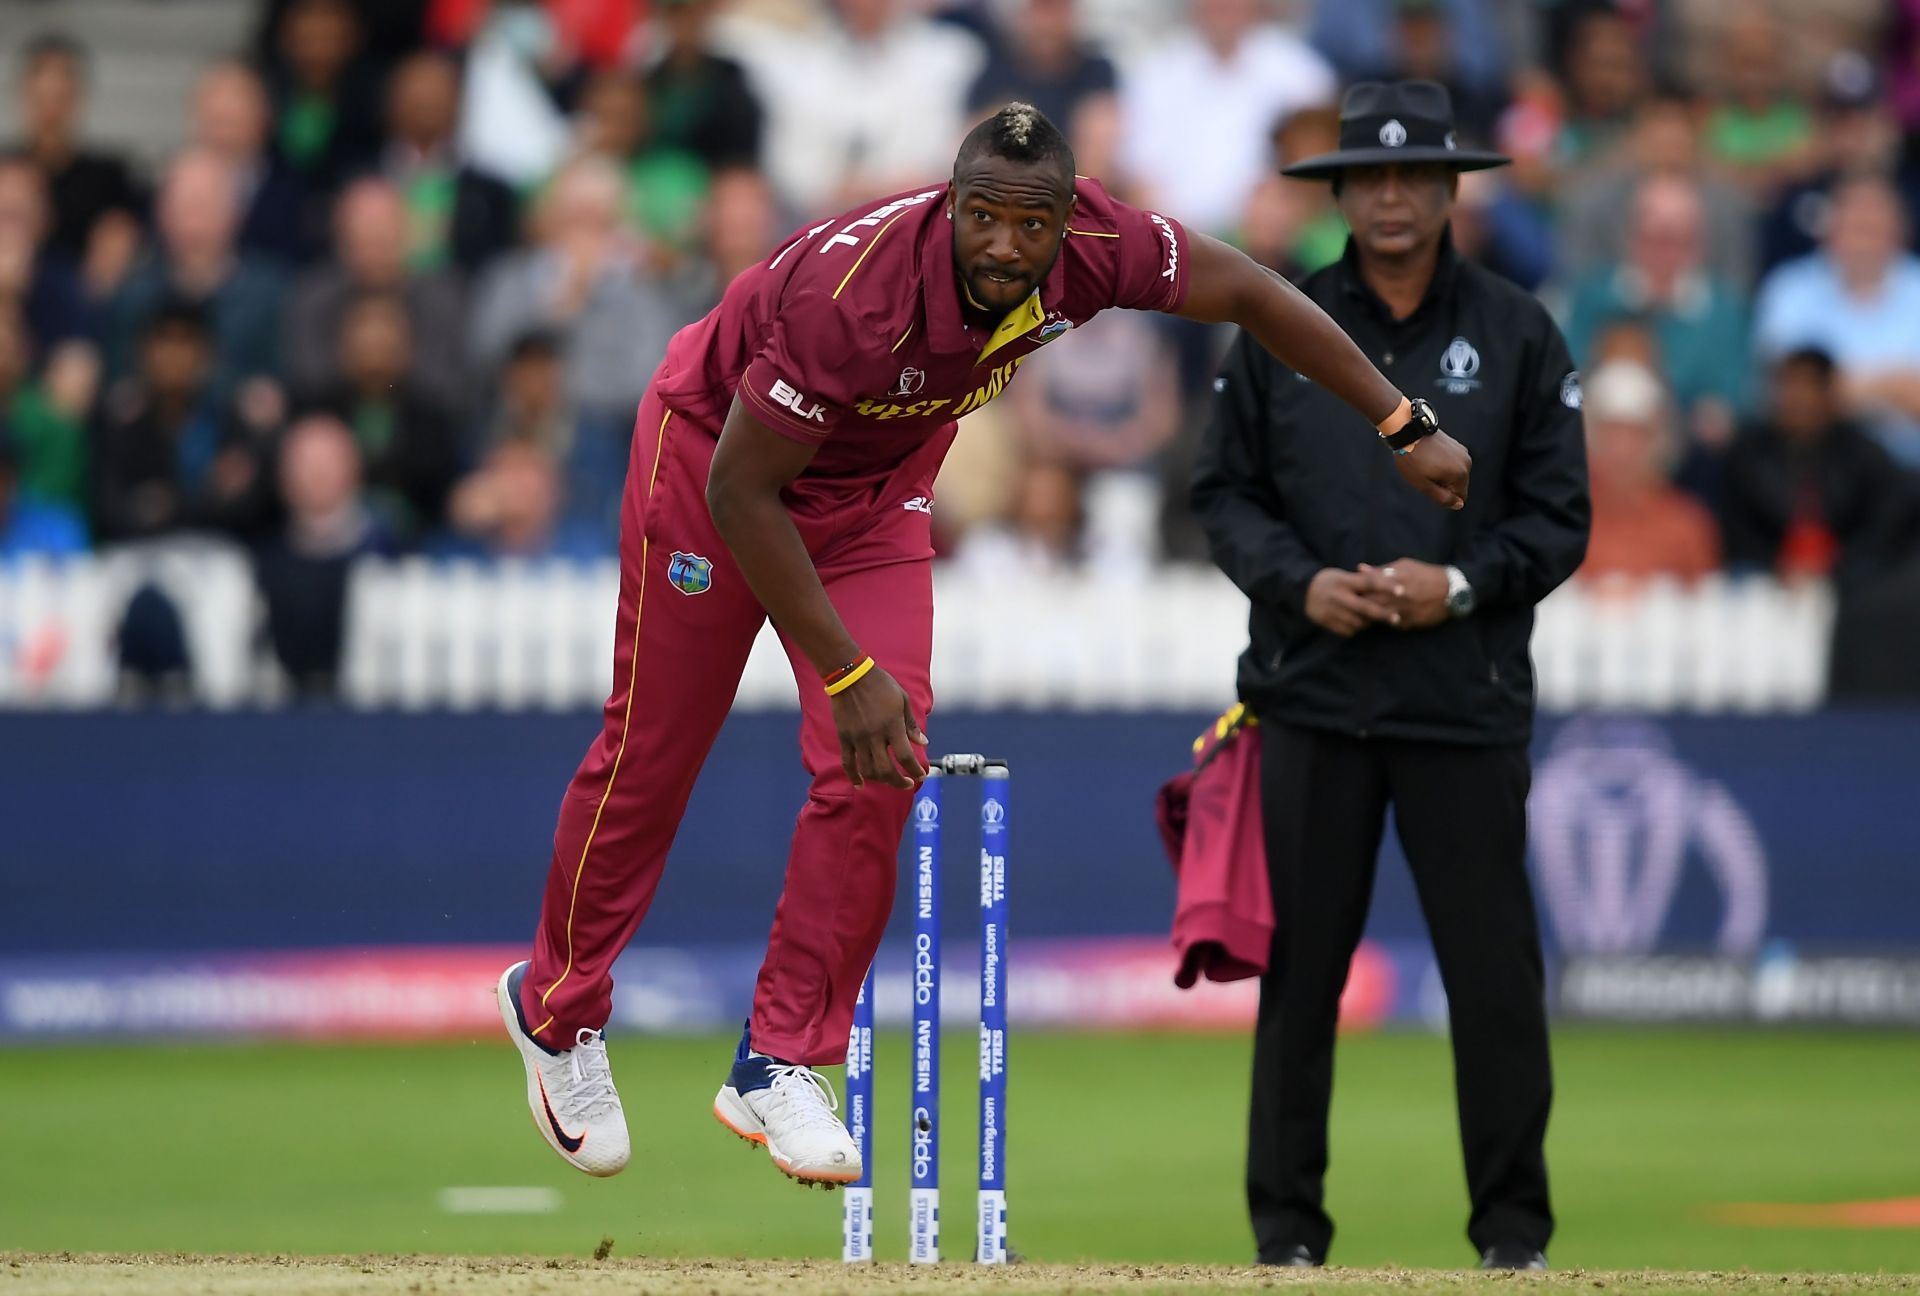 Andre Russell will be a key player for West Indies in the T20I World Cup later this year (Image Credits: Getty)